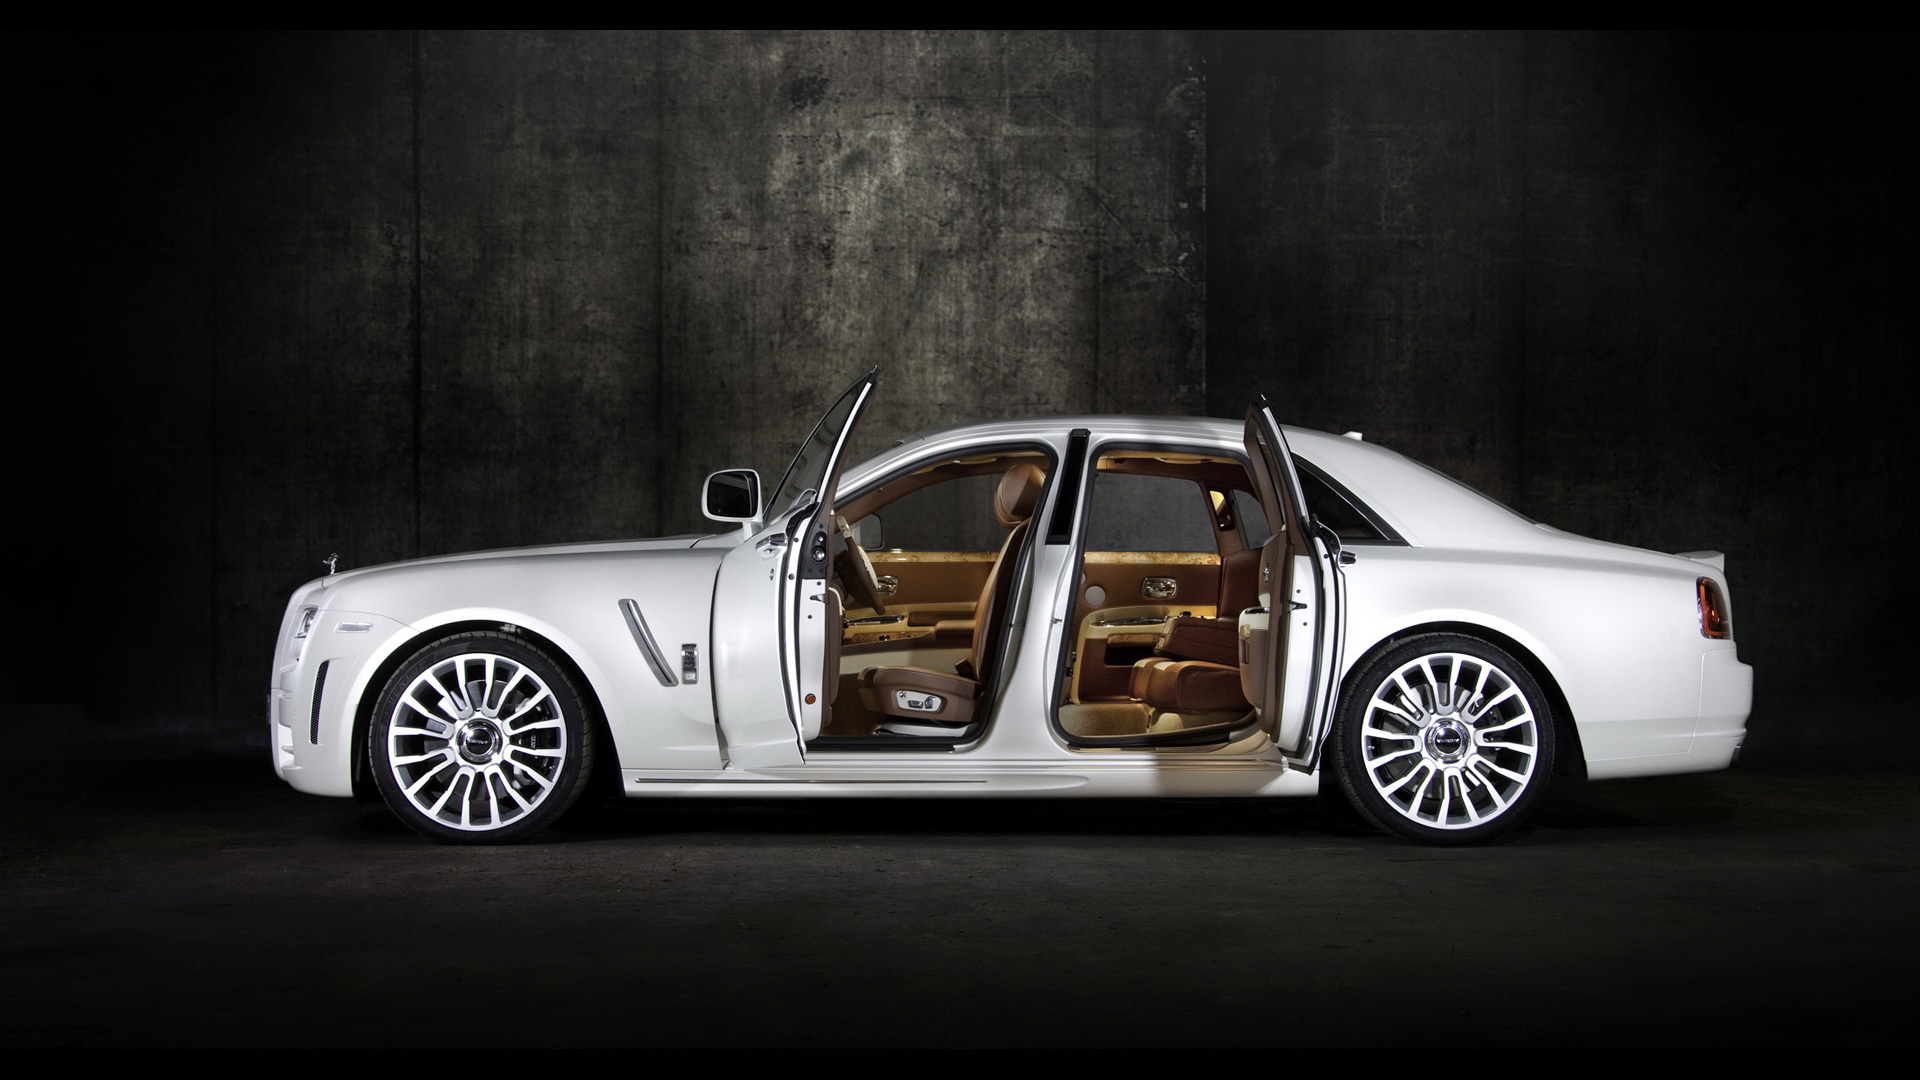 2010 Mansory Rolls-Royce(˹˹) White Ghost Limited(ֽ1)